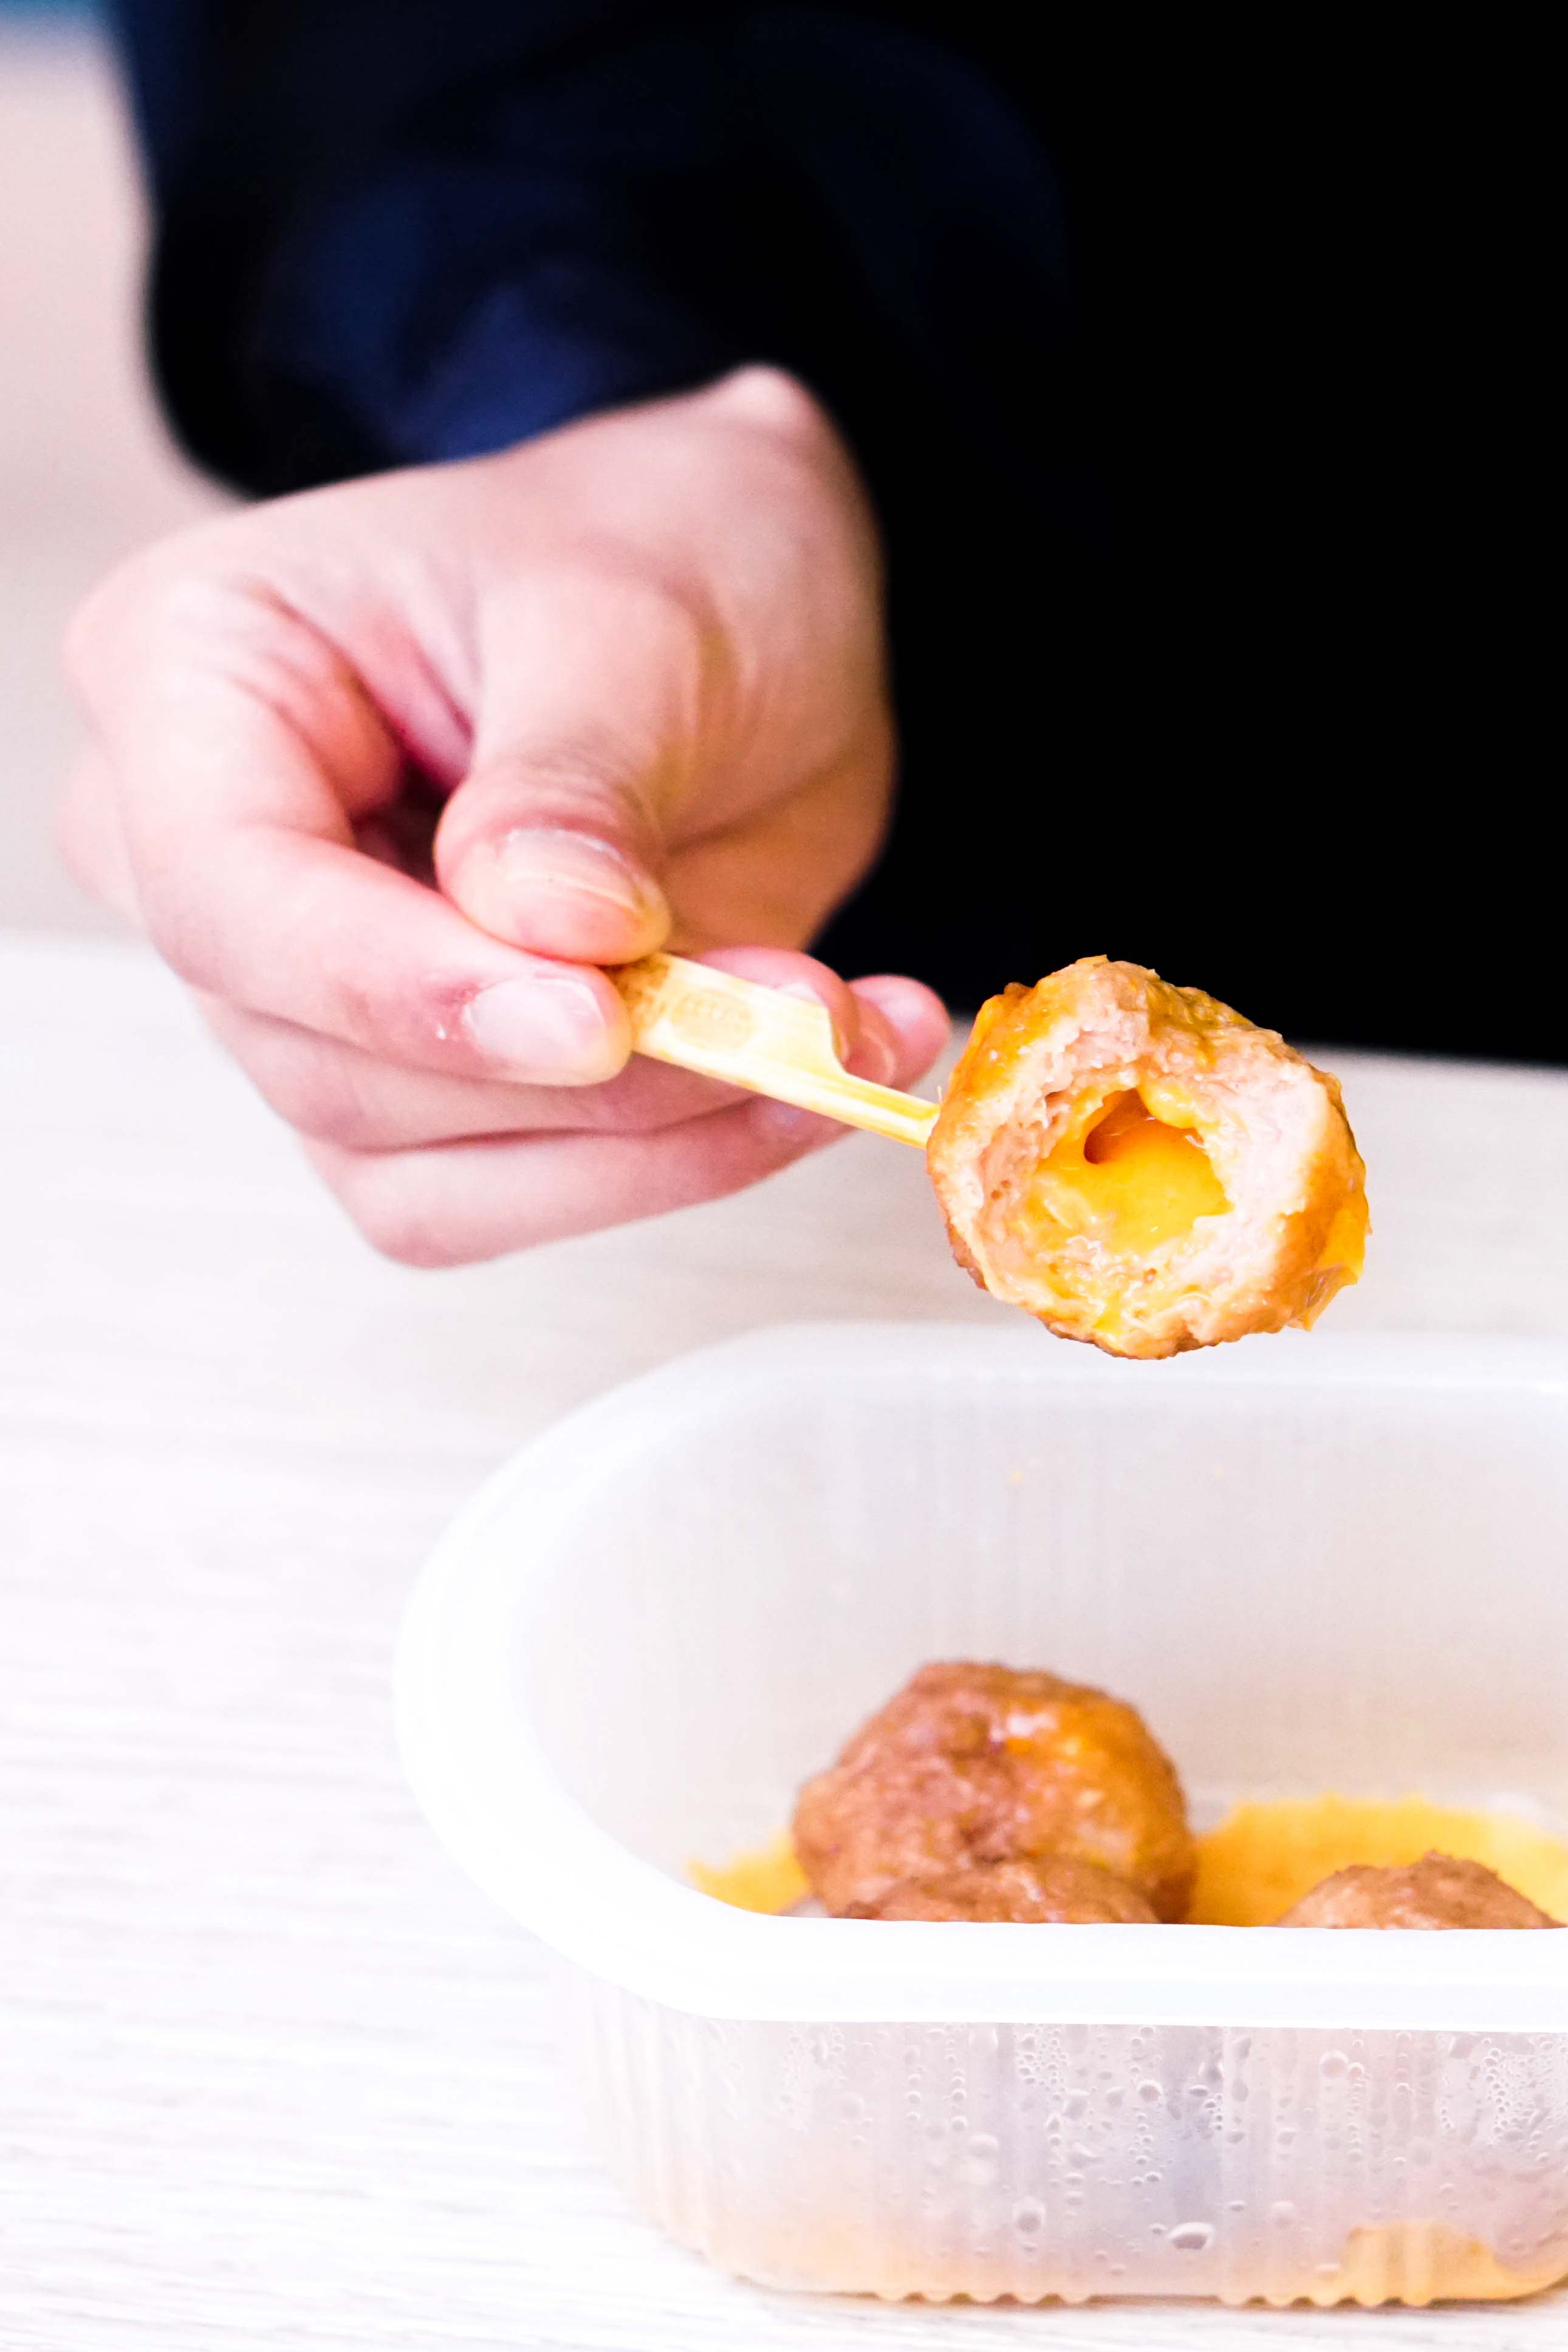 Apart from the dip, Bobo Pop’s chicken cheese balls come with cheese inside it too, waiting to ooze out as you sink your teeth in!